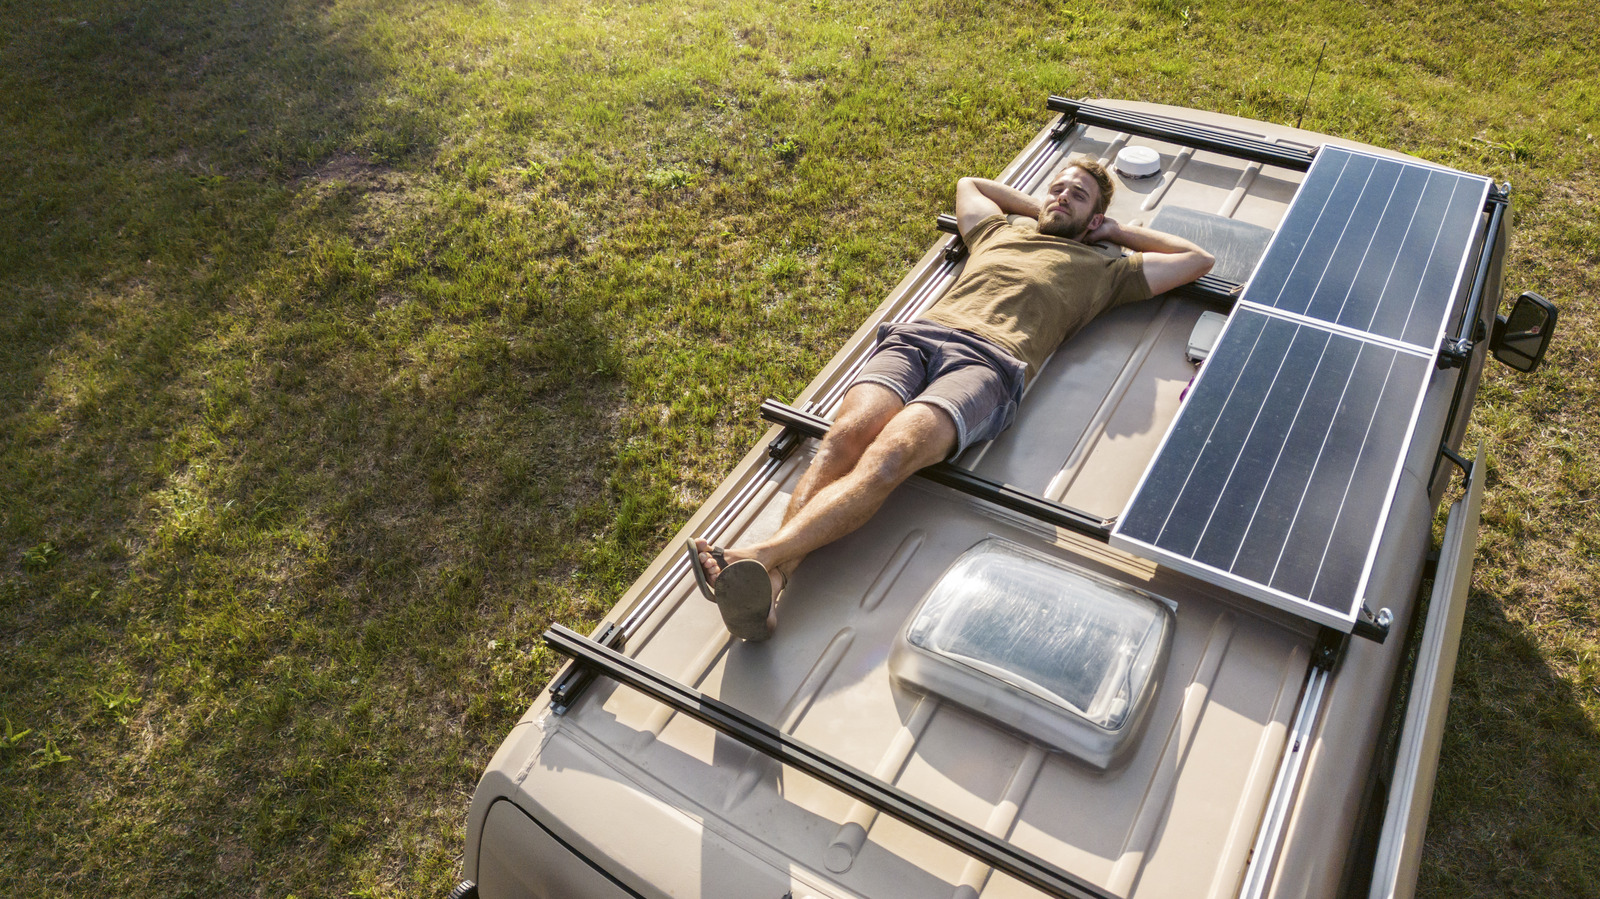 How Many Solar Panels Does It Take To Power An RV/Motorhome?